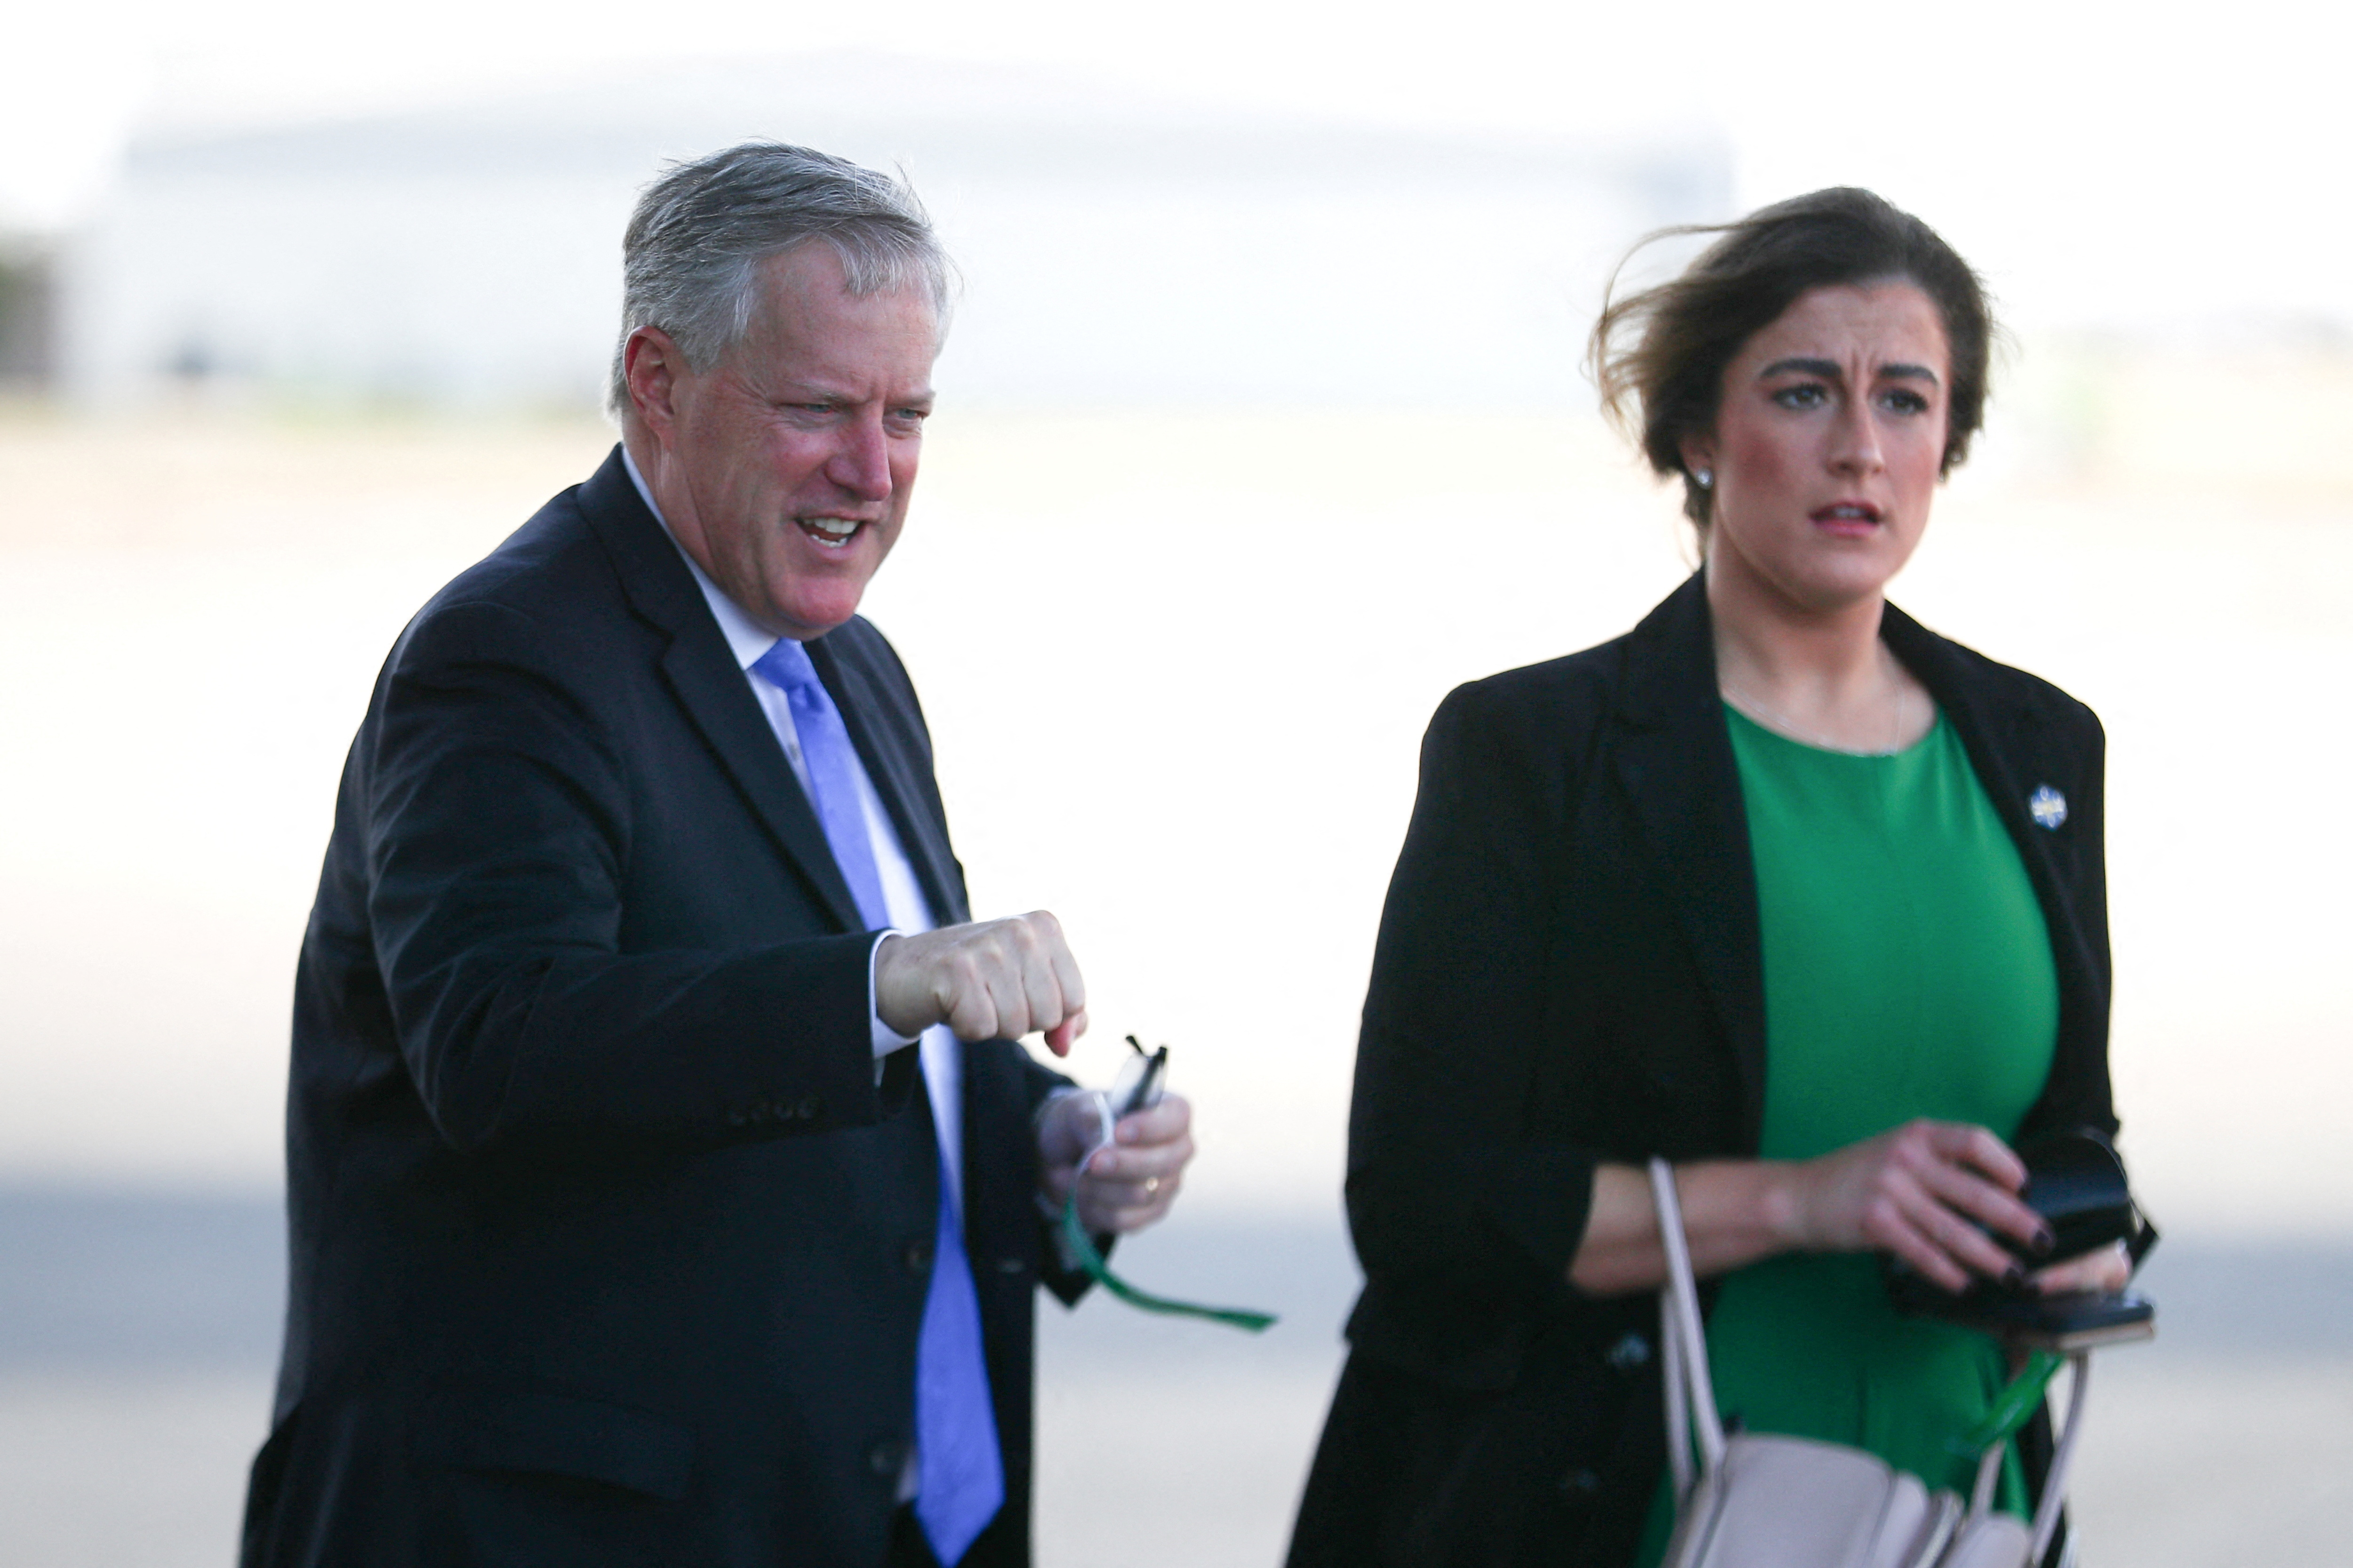 White House Chief of Staff Mark Meadows, left, walks with senior aide Cassidy Hutchinson before a campaign rally in Gastonia